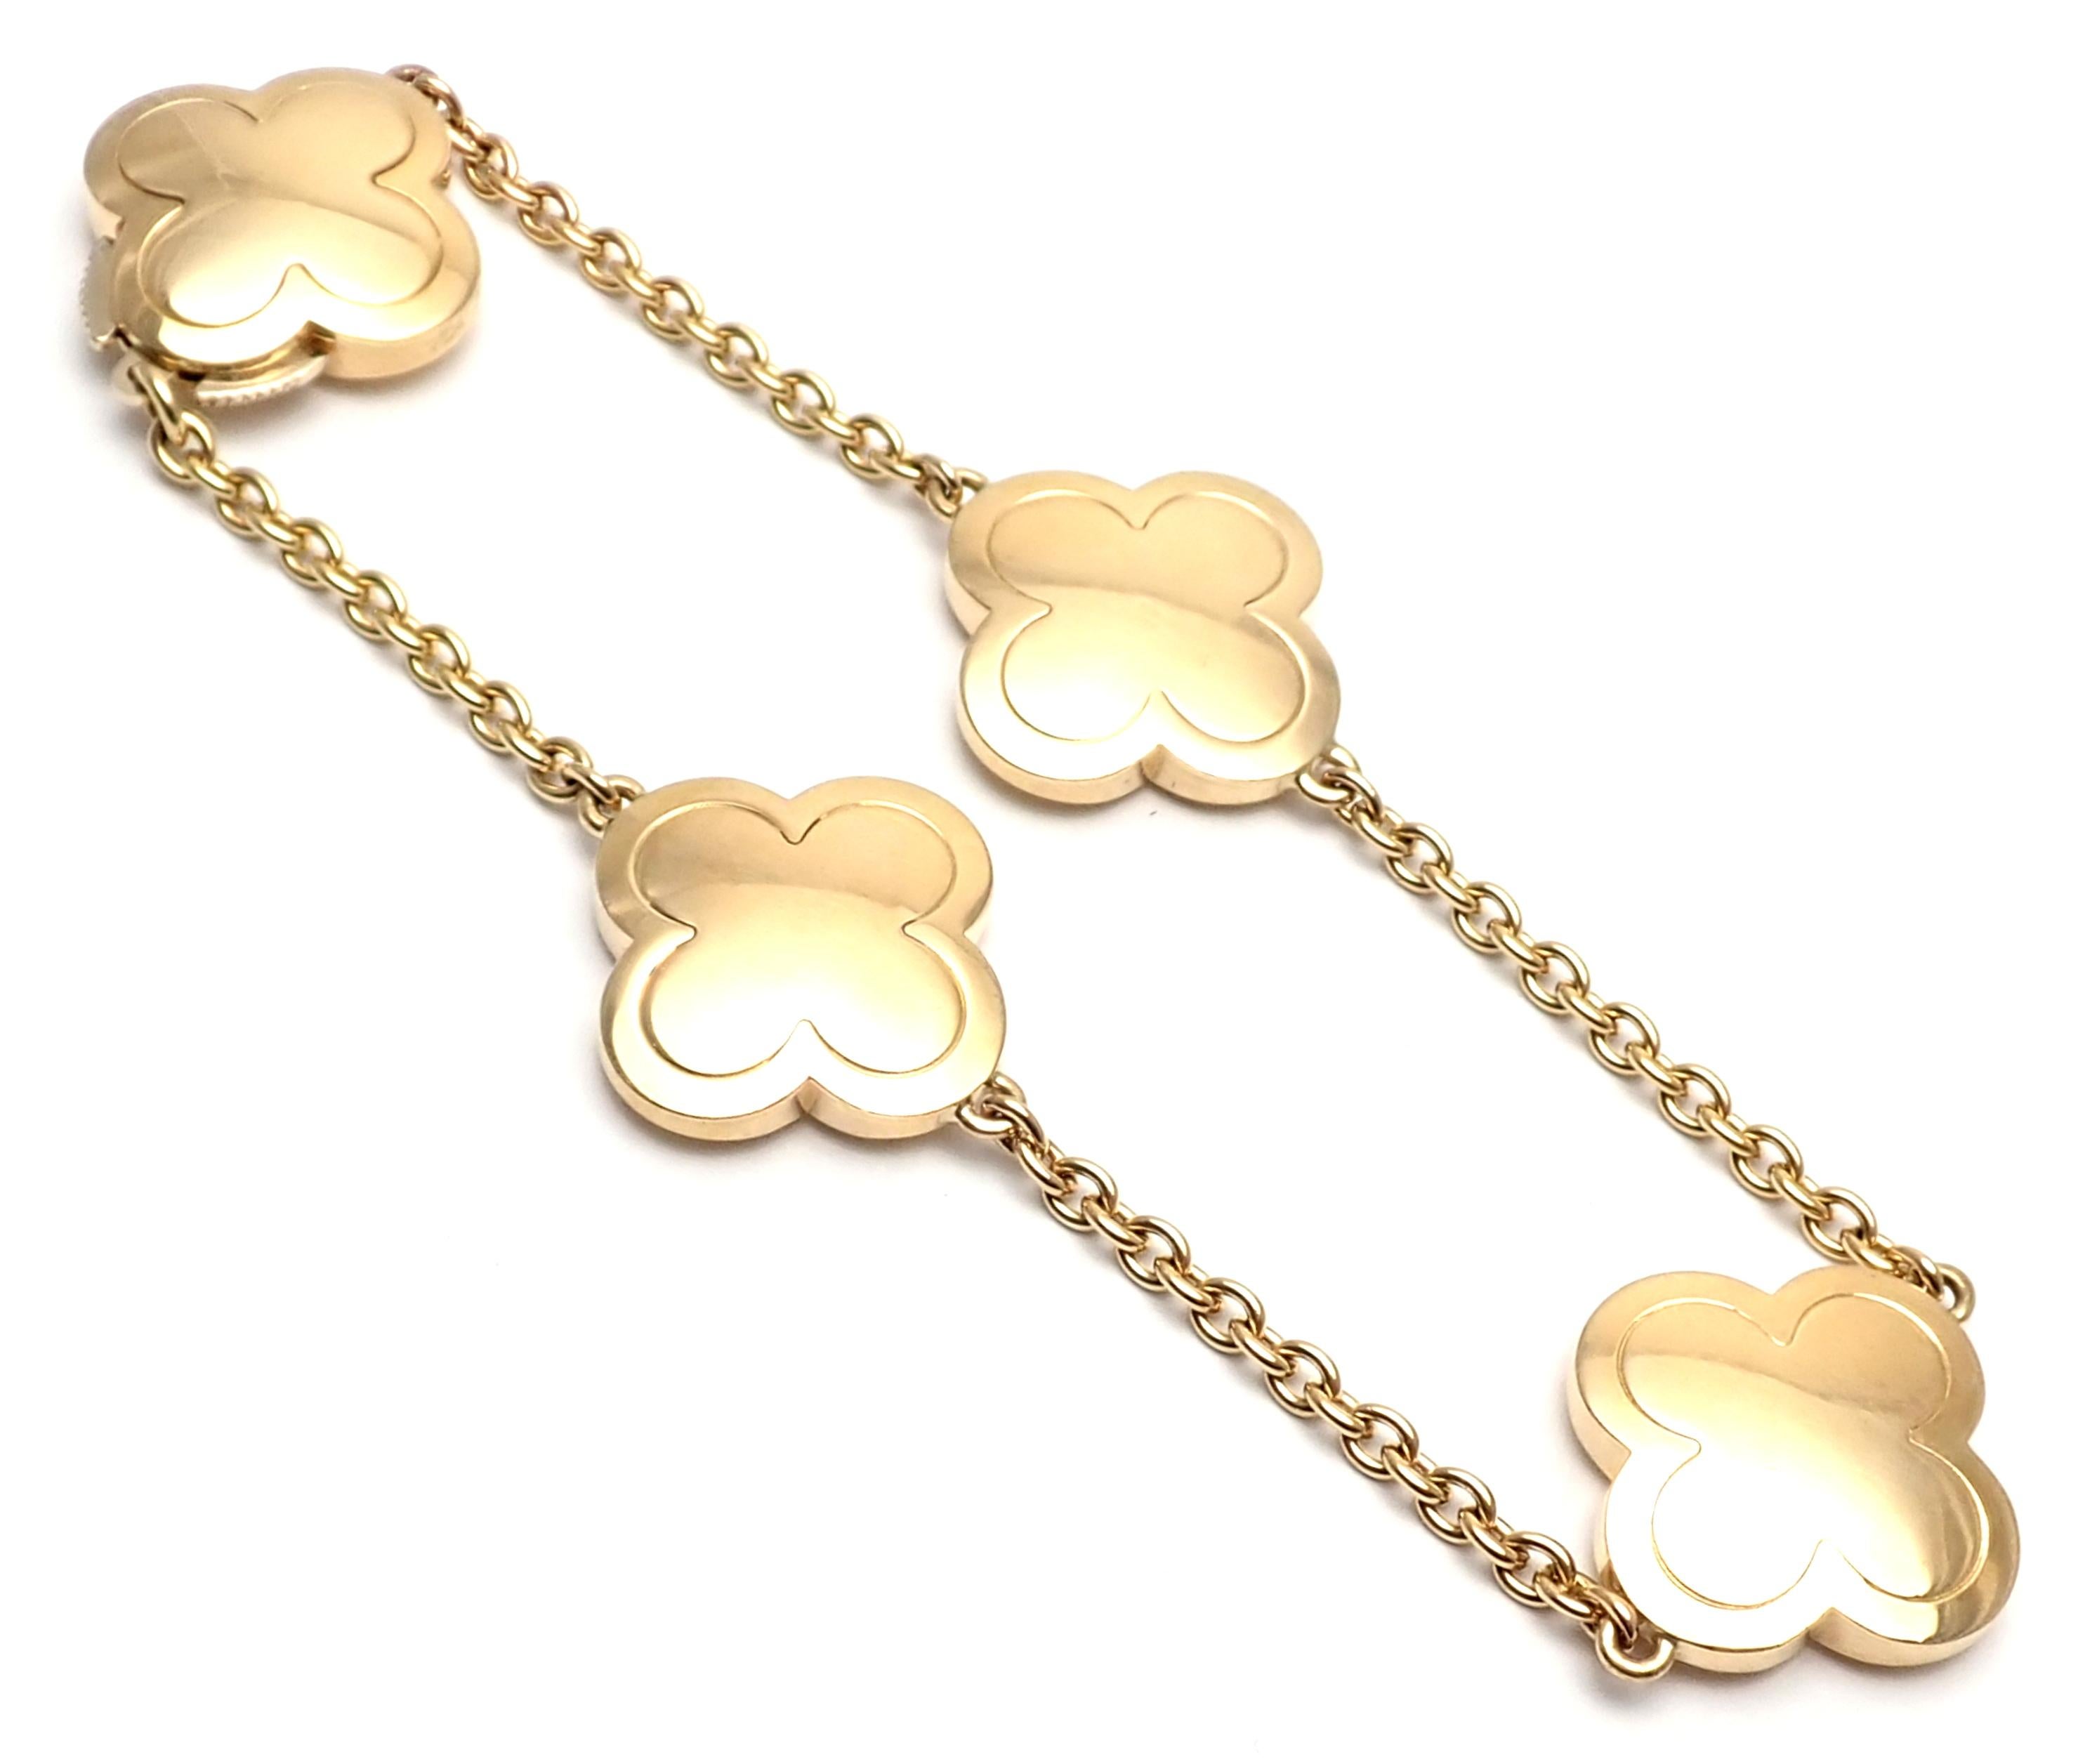 18k Yellow Gold Pure Alhambra Bracelet by Van Cleef & Arpels.
This bracelet comes with service paper from VCA store.
Details:
Length: 7